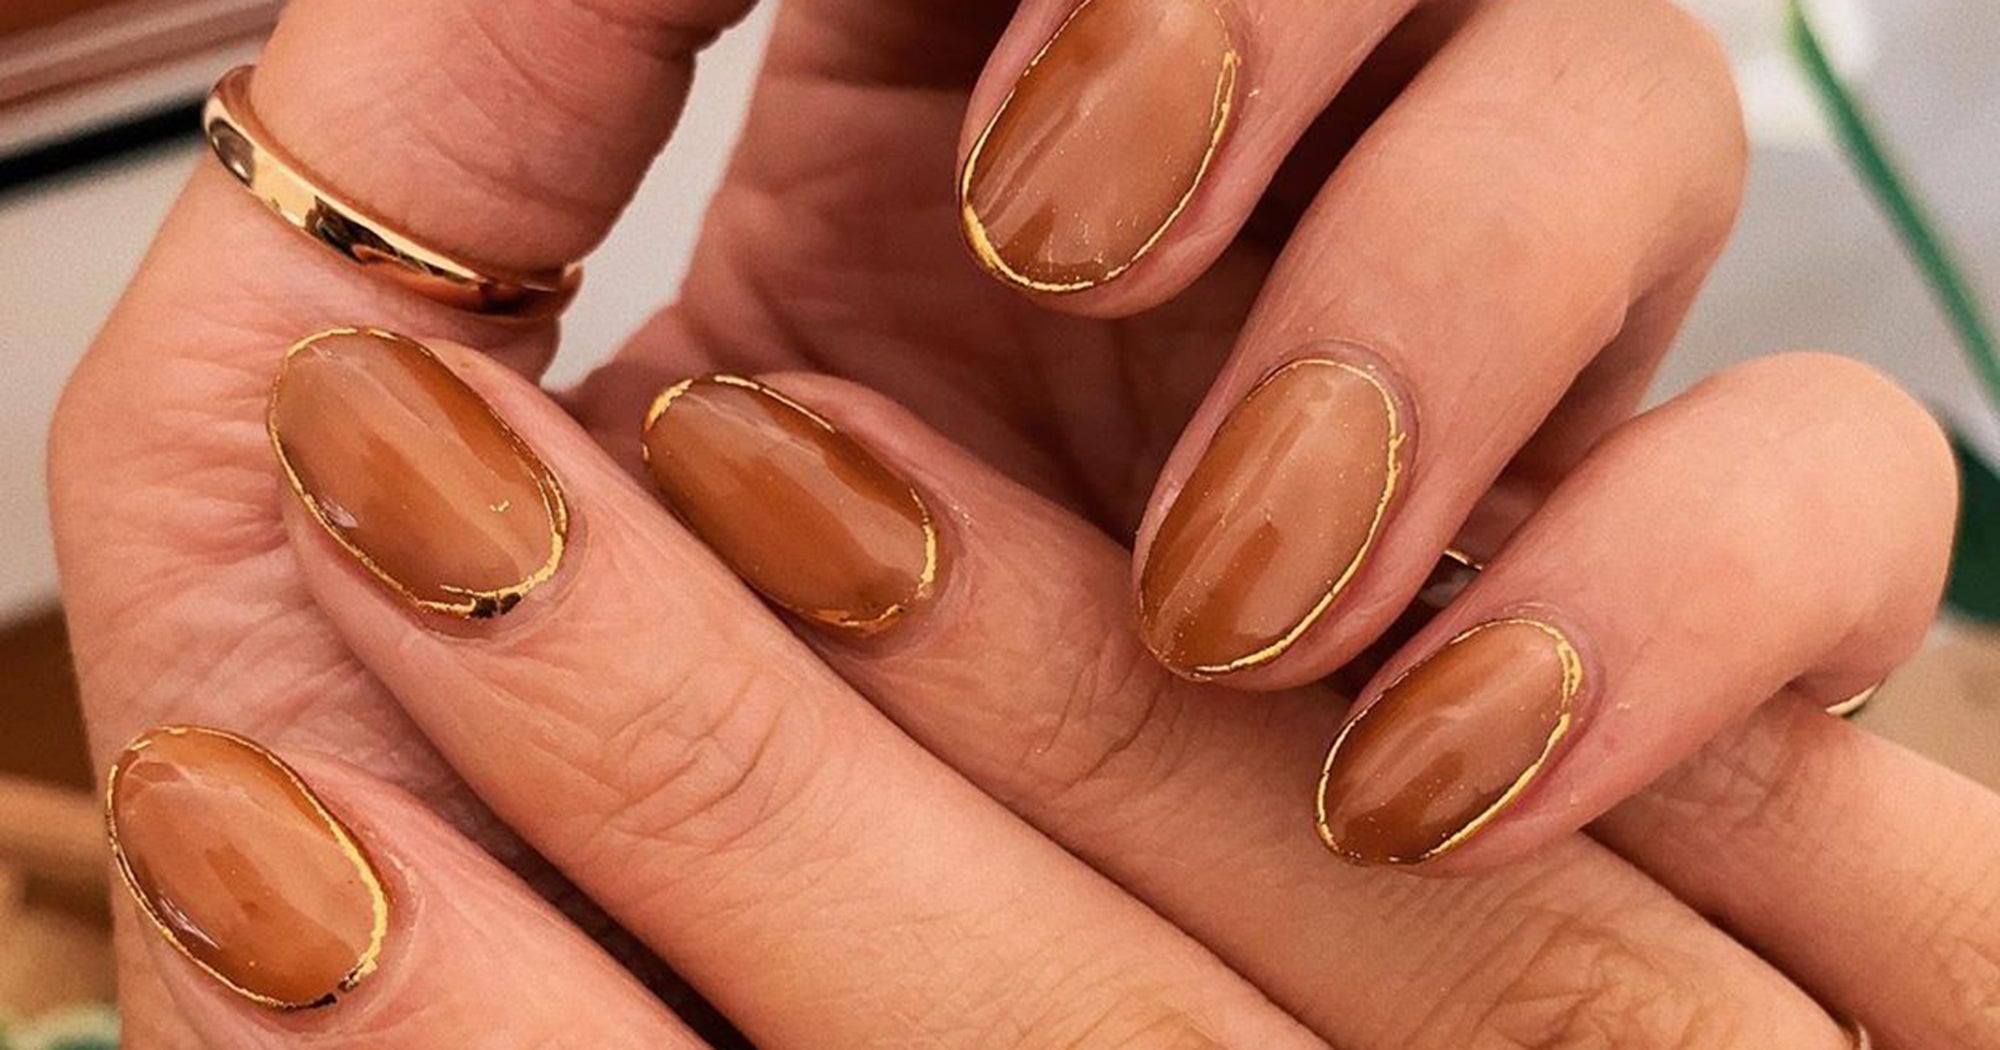 Gold Rimmed Nails Are Chic Nail Art Trend For Fall 2019